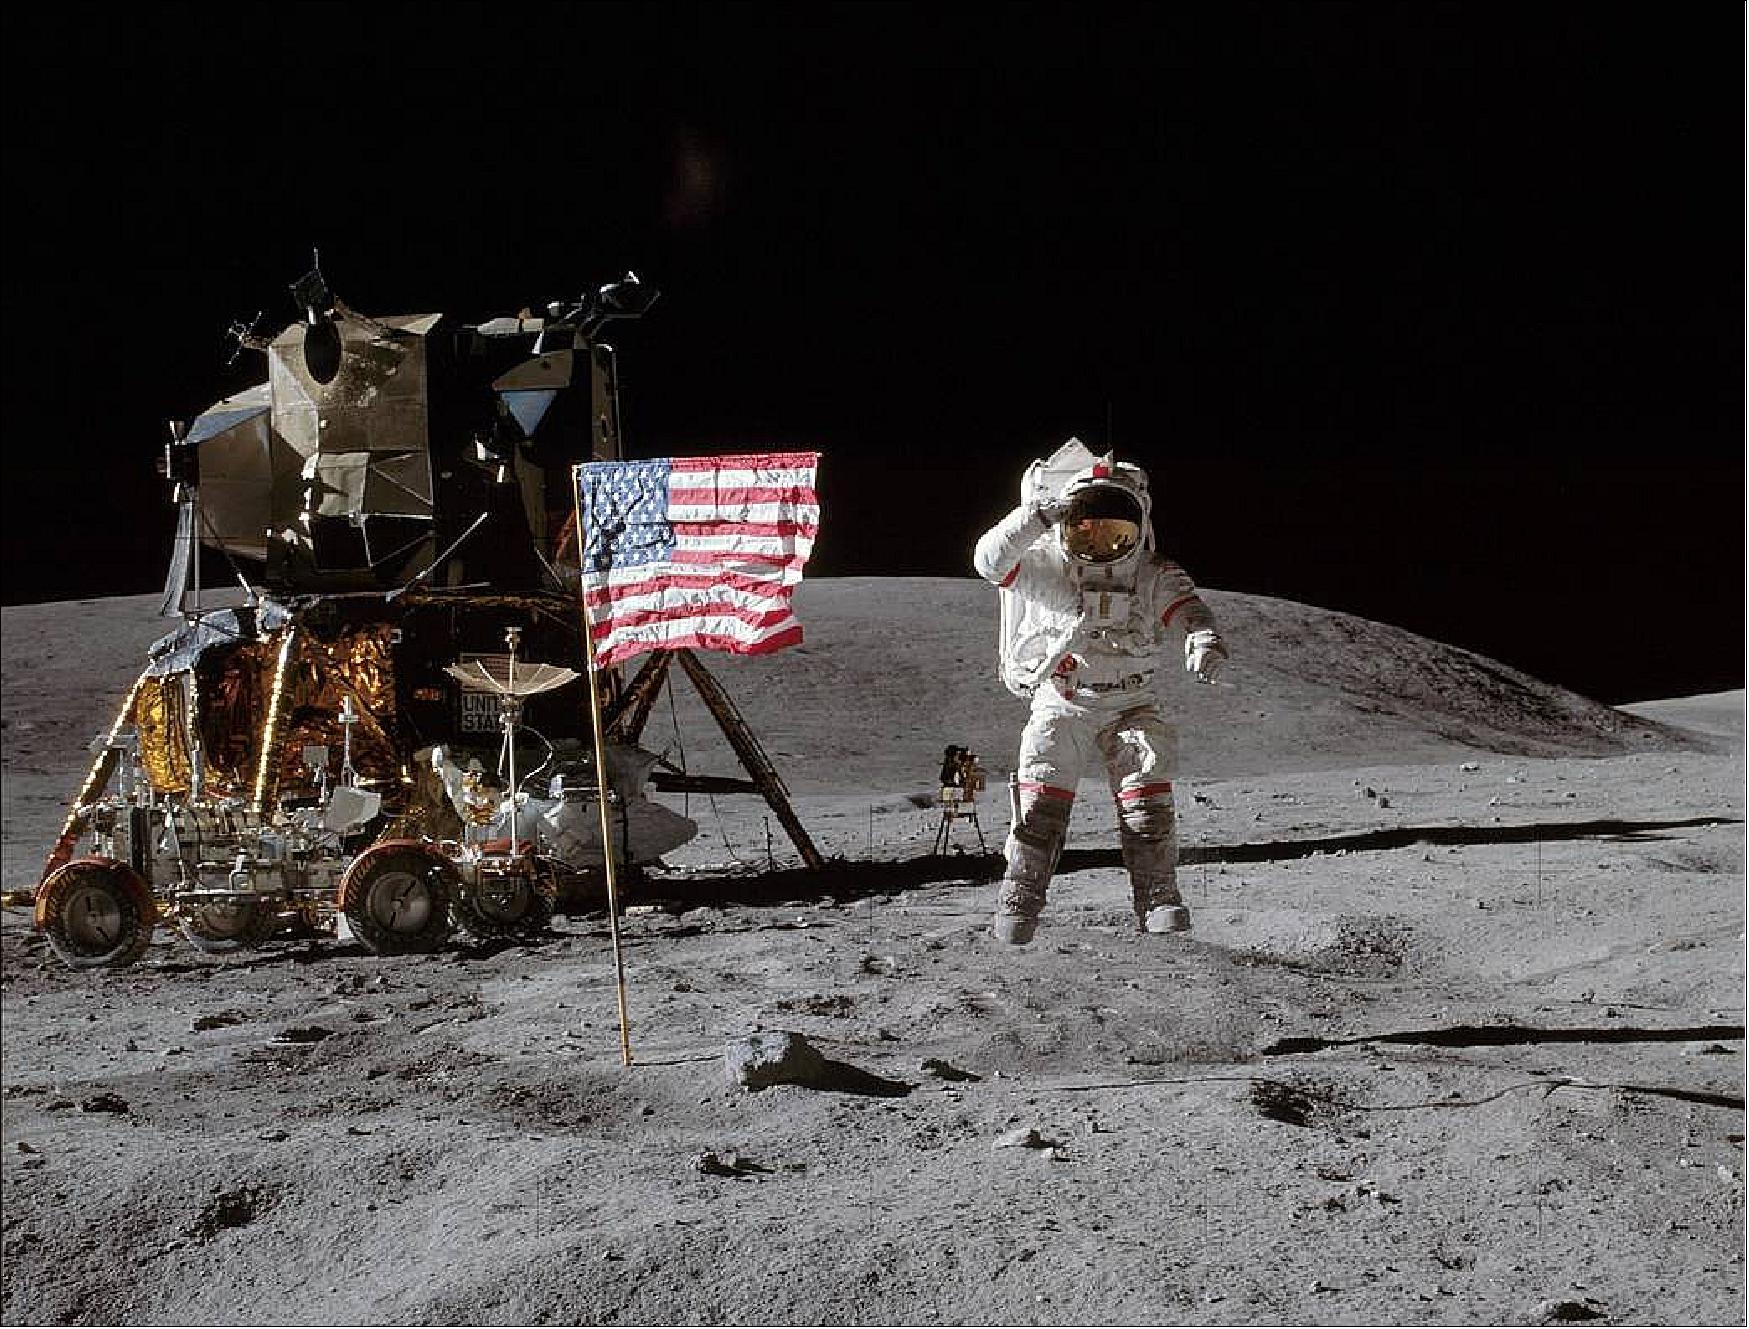 Figure 26: Astronaut John W. Young leaps from the lunar surface as he salutes the United States flag at the Descartes landing site during the first Apollo 16 extravehicular activity. Astronaut Charles M. Duke Jr., lunar module pilot, took this picture. The Lunar Module "Orion" is on the left. The Lunar Roving Vehicle is parked beside Orion and the object behind Young (in the shadow of the Lunar Module) is the Far Ultraviolet Camera/Spectrograph (image credit: NASA)